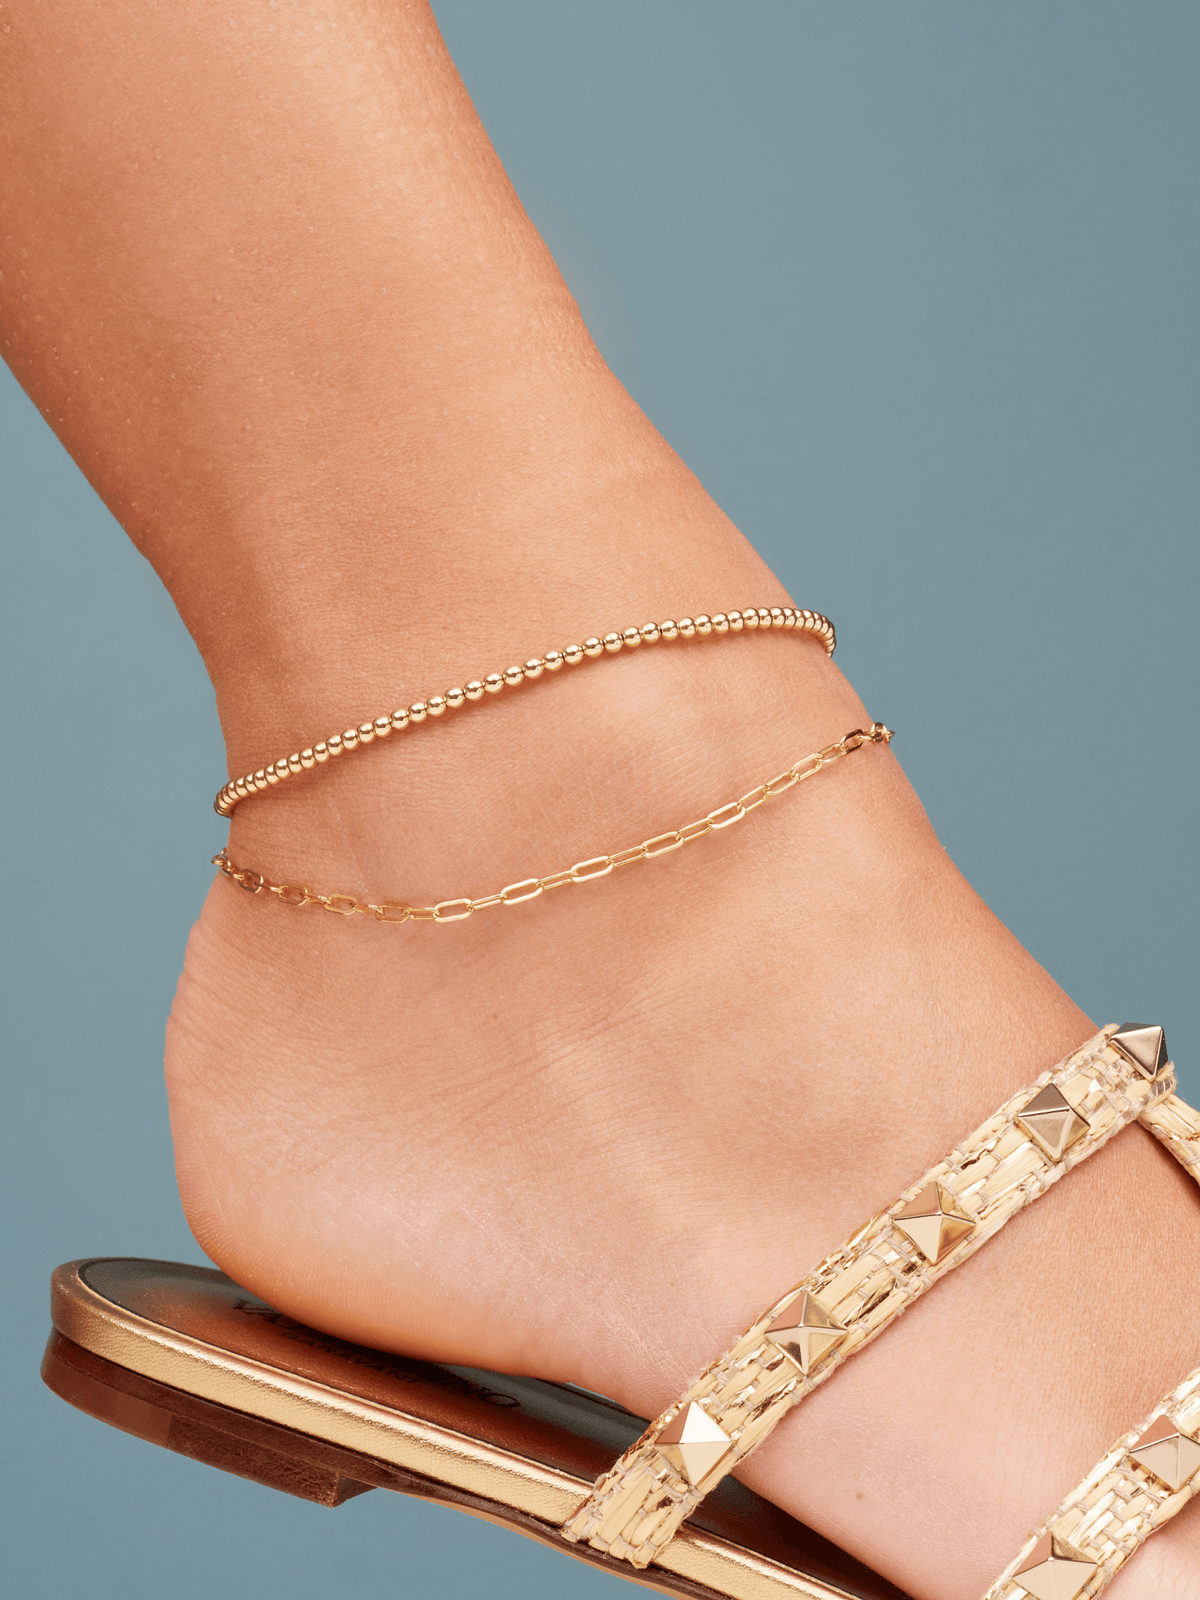 3mm Stretch Anklet layered with Paperclip Anklet on Women's Foot